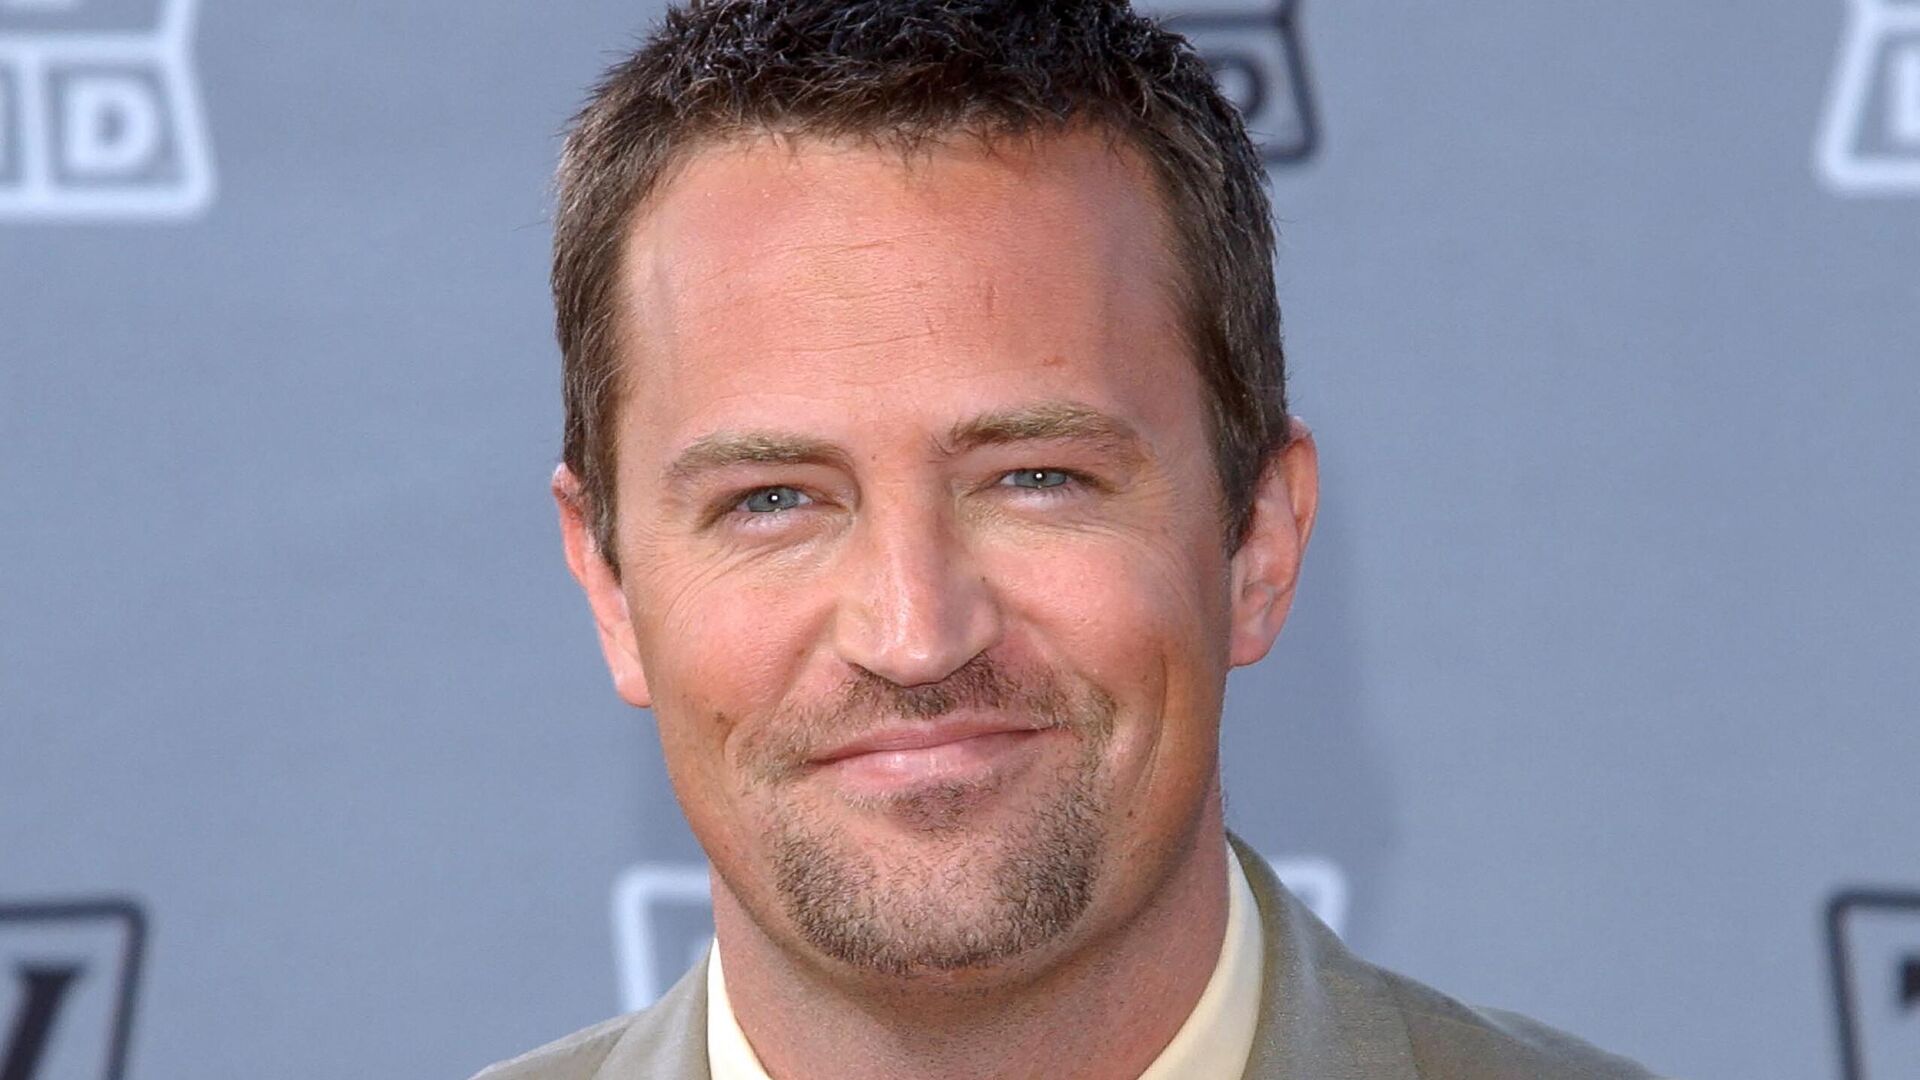 Hollywood Mourns the Loss of “Friends” Star Matthew Perry